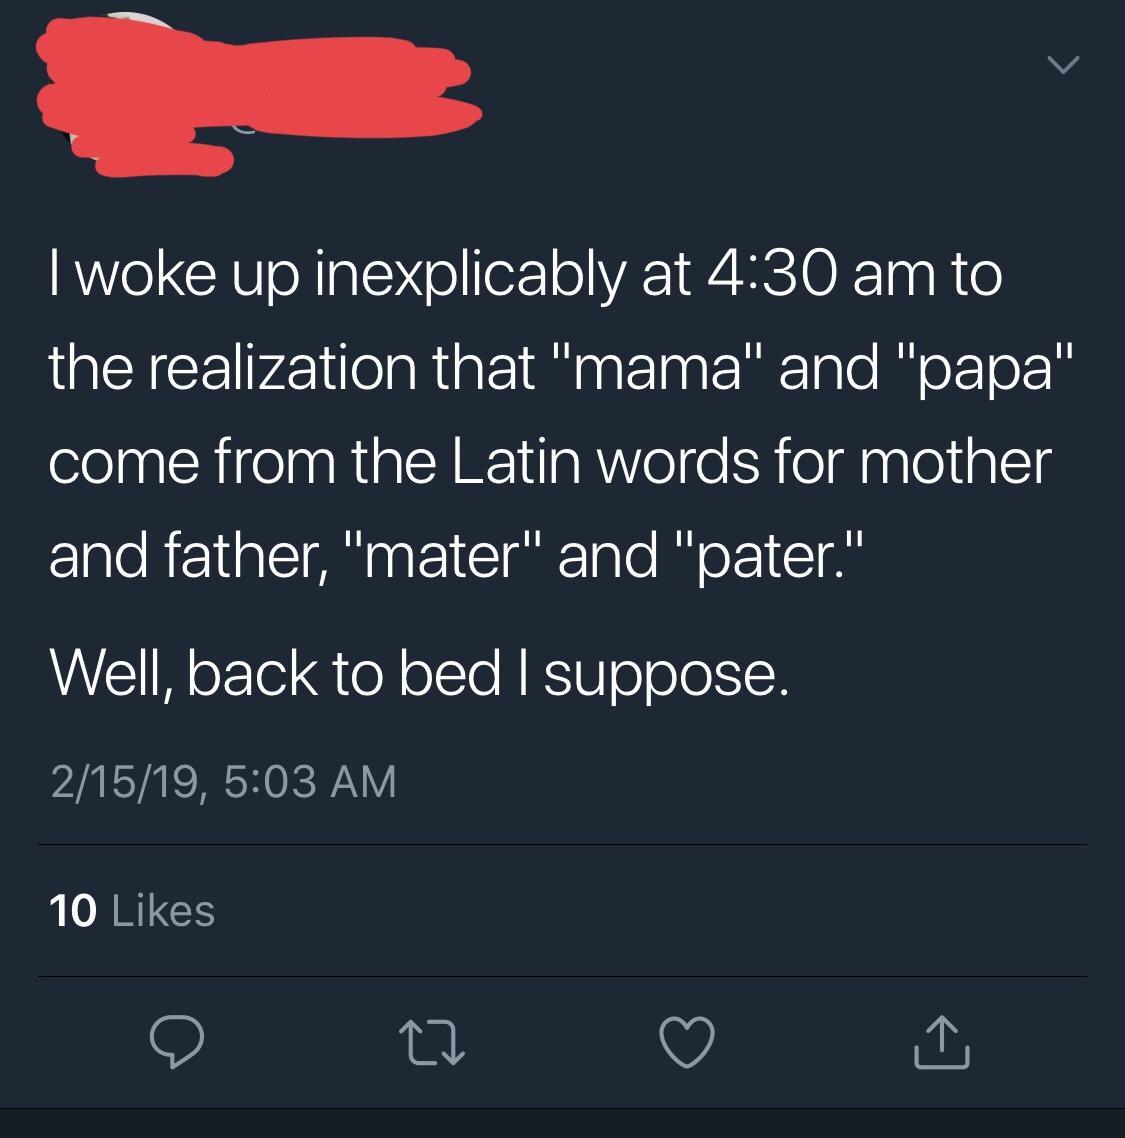 screenshot - Twoke up inexplicably at to the realization that "mama" and "papa" come from the Latin words for mother and father, "mater" and "pater." Well, back to bed I suppose. 21519, 10